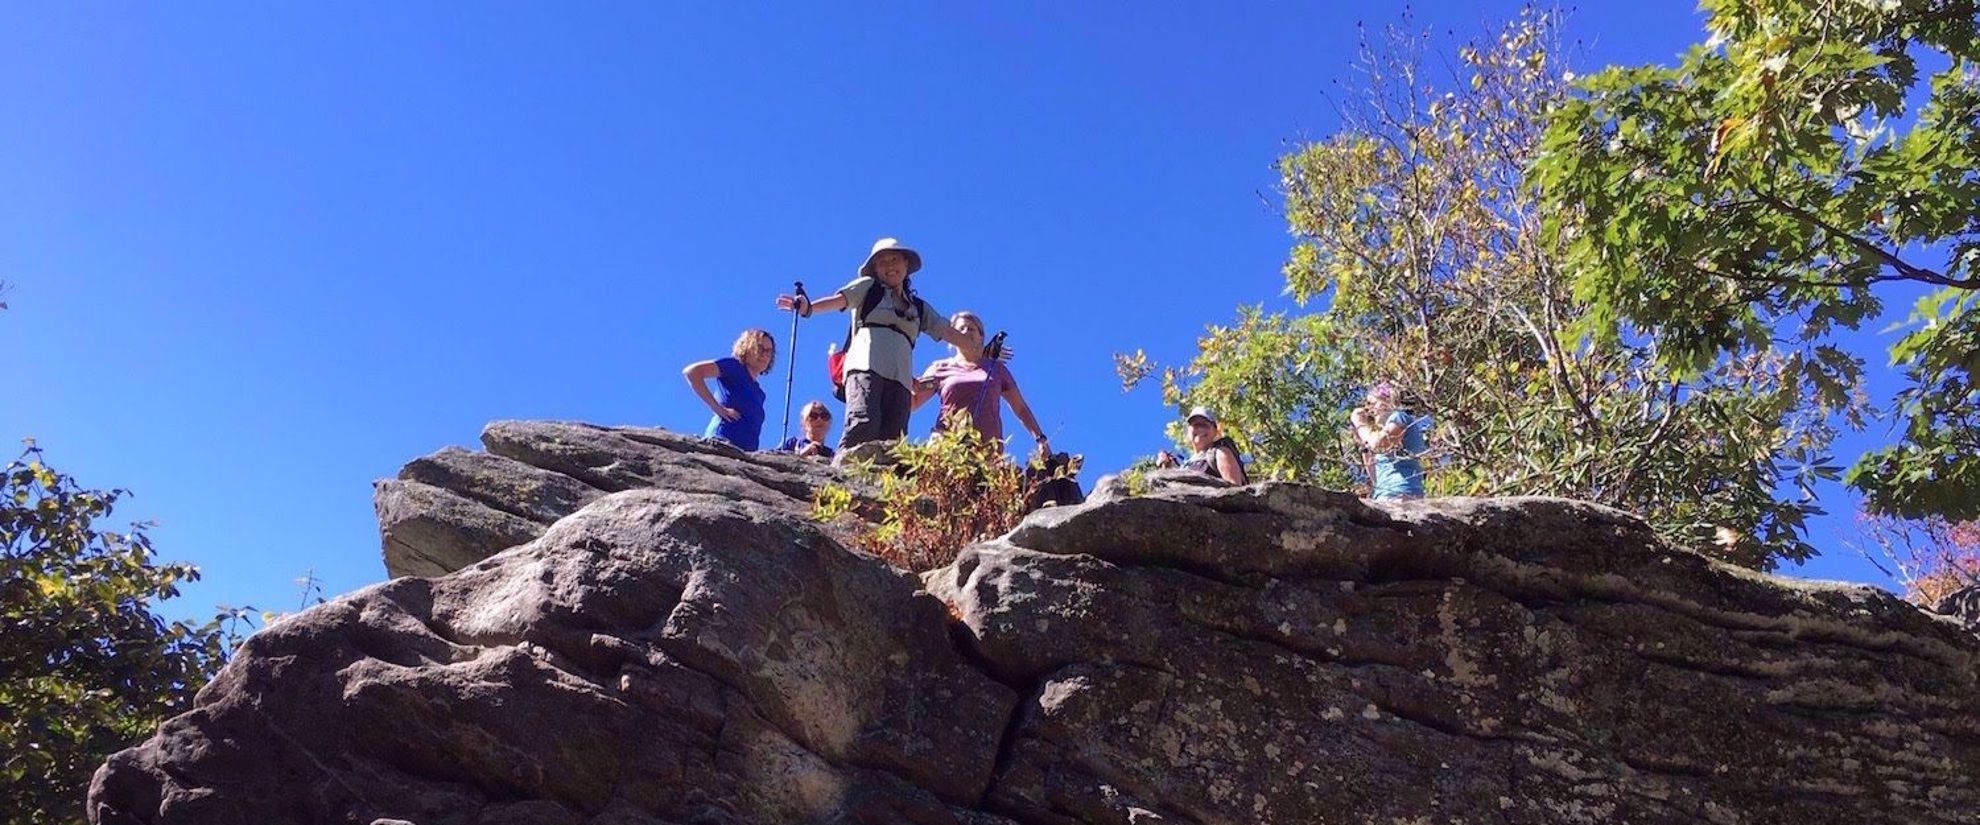 Women hiking Appalachian trail, standing on rock looking down and smiling